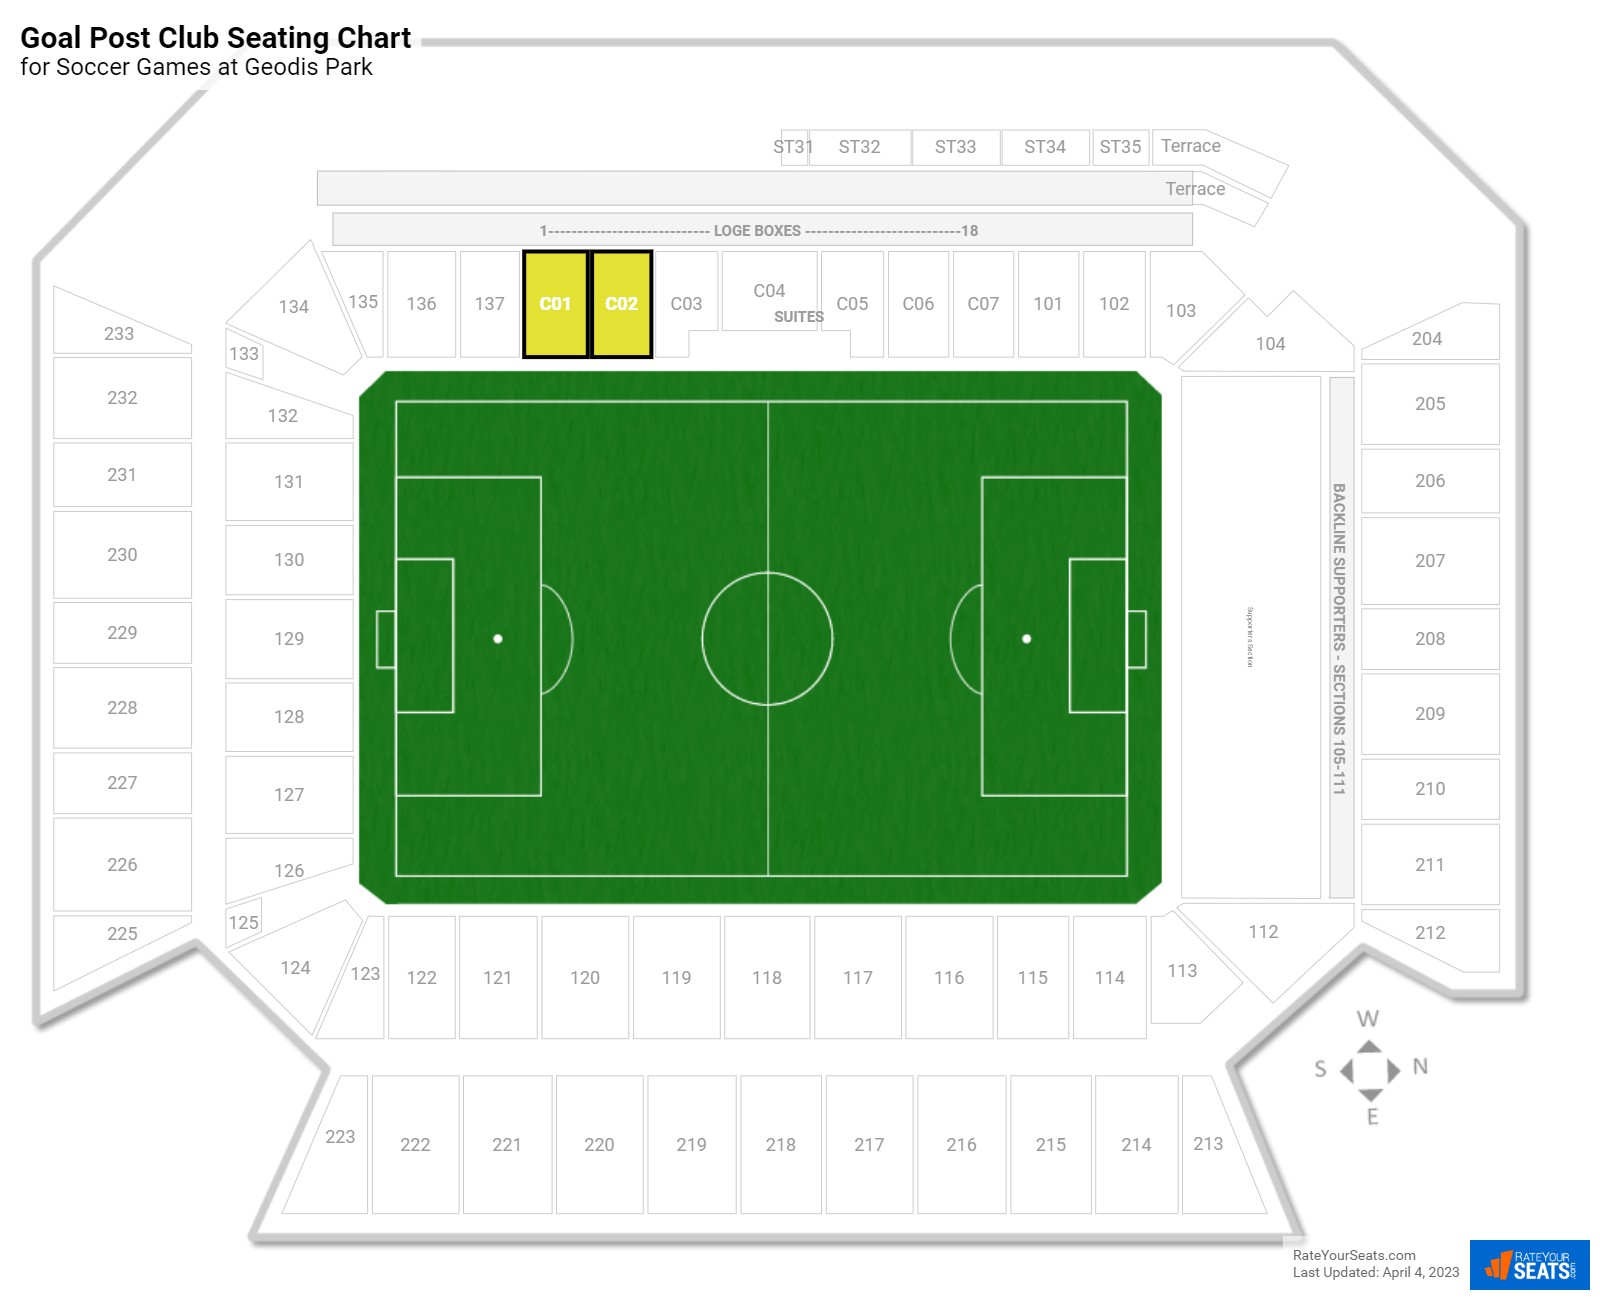 Soccer Goal Post Club Seating Chart at Geodis Park